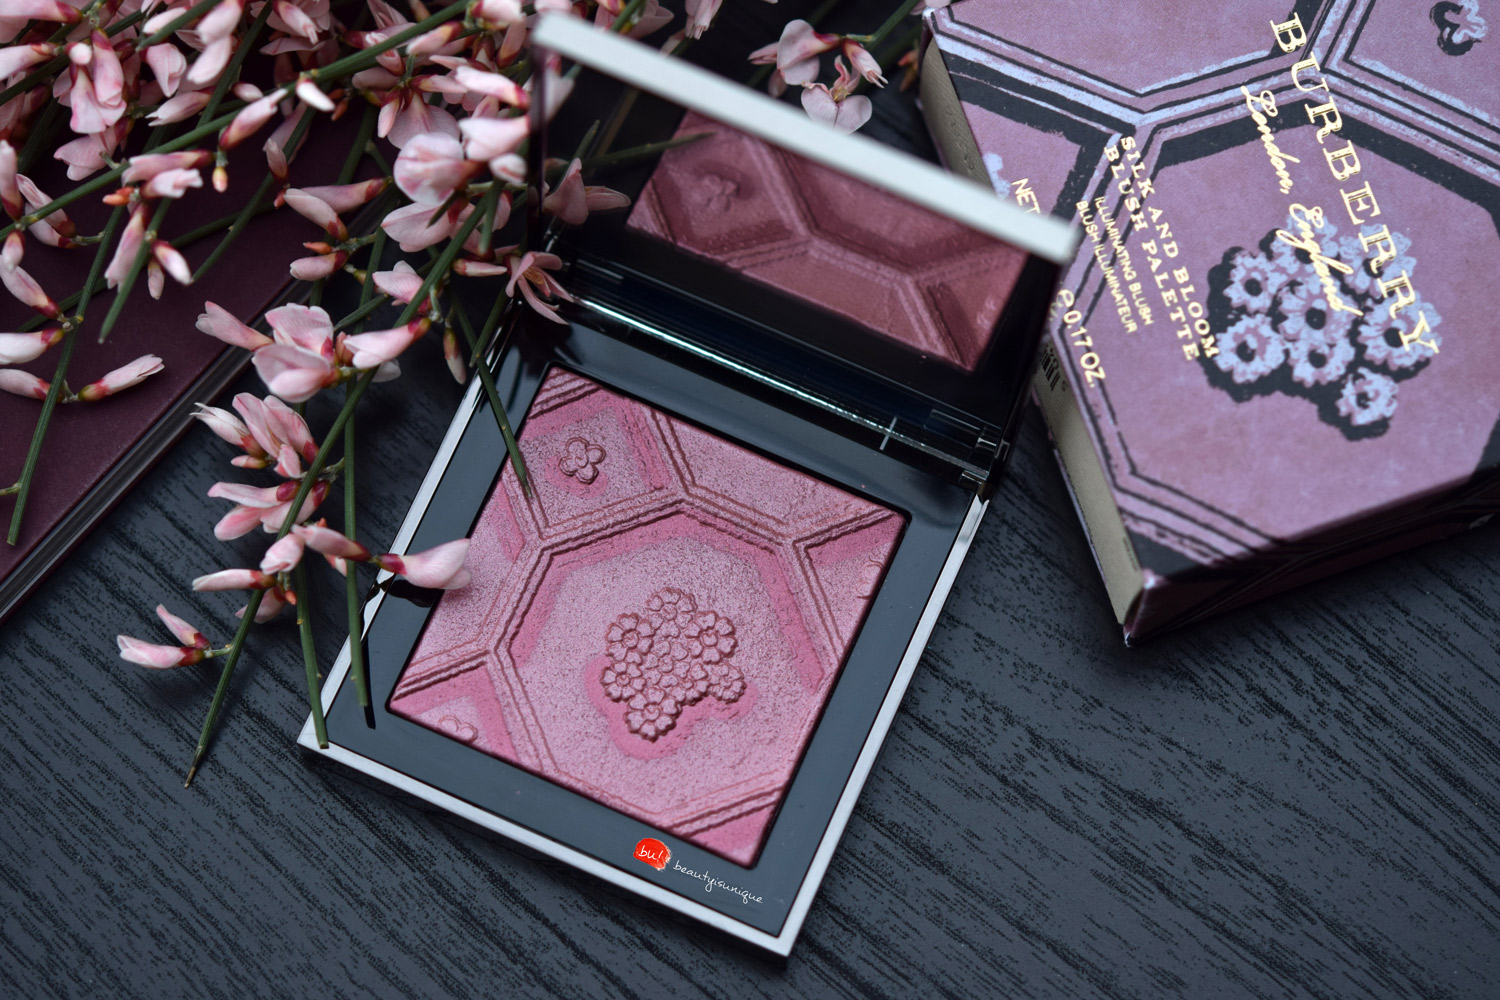 Burberry-silk-and-bloom-blush-palette